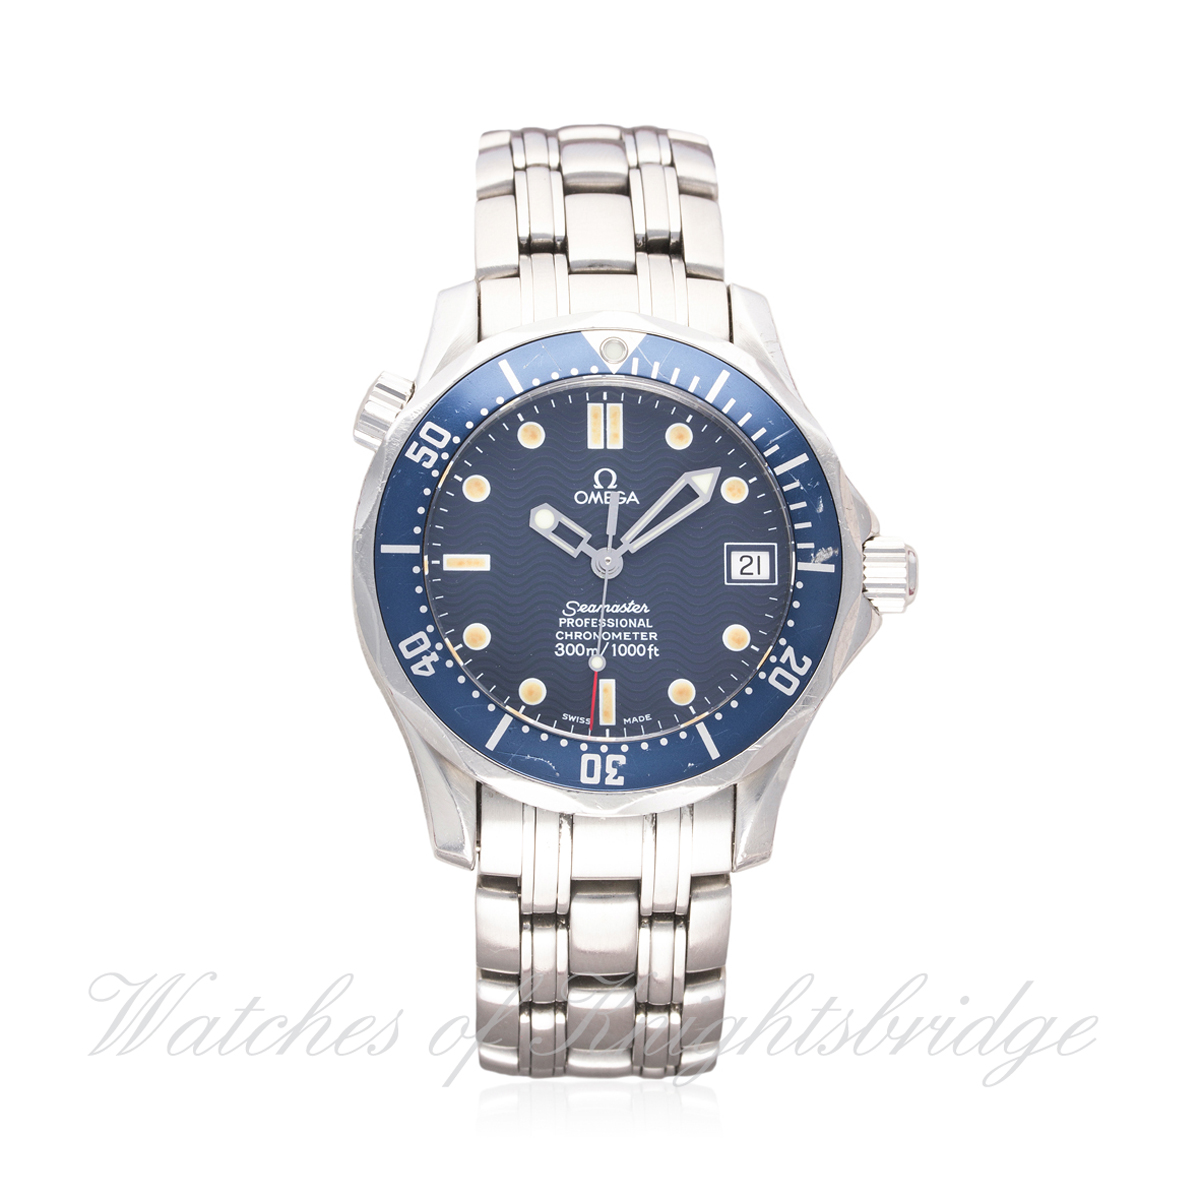 A GENTLEMAN'S MID SIZE STAINLESS STEEL OMEGA SEAMASTER PROFESSIONAL 300 AUTOMATIC BRACELET WATCH